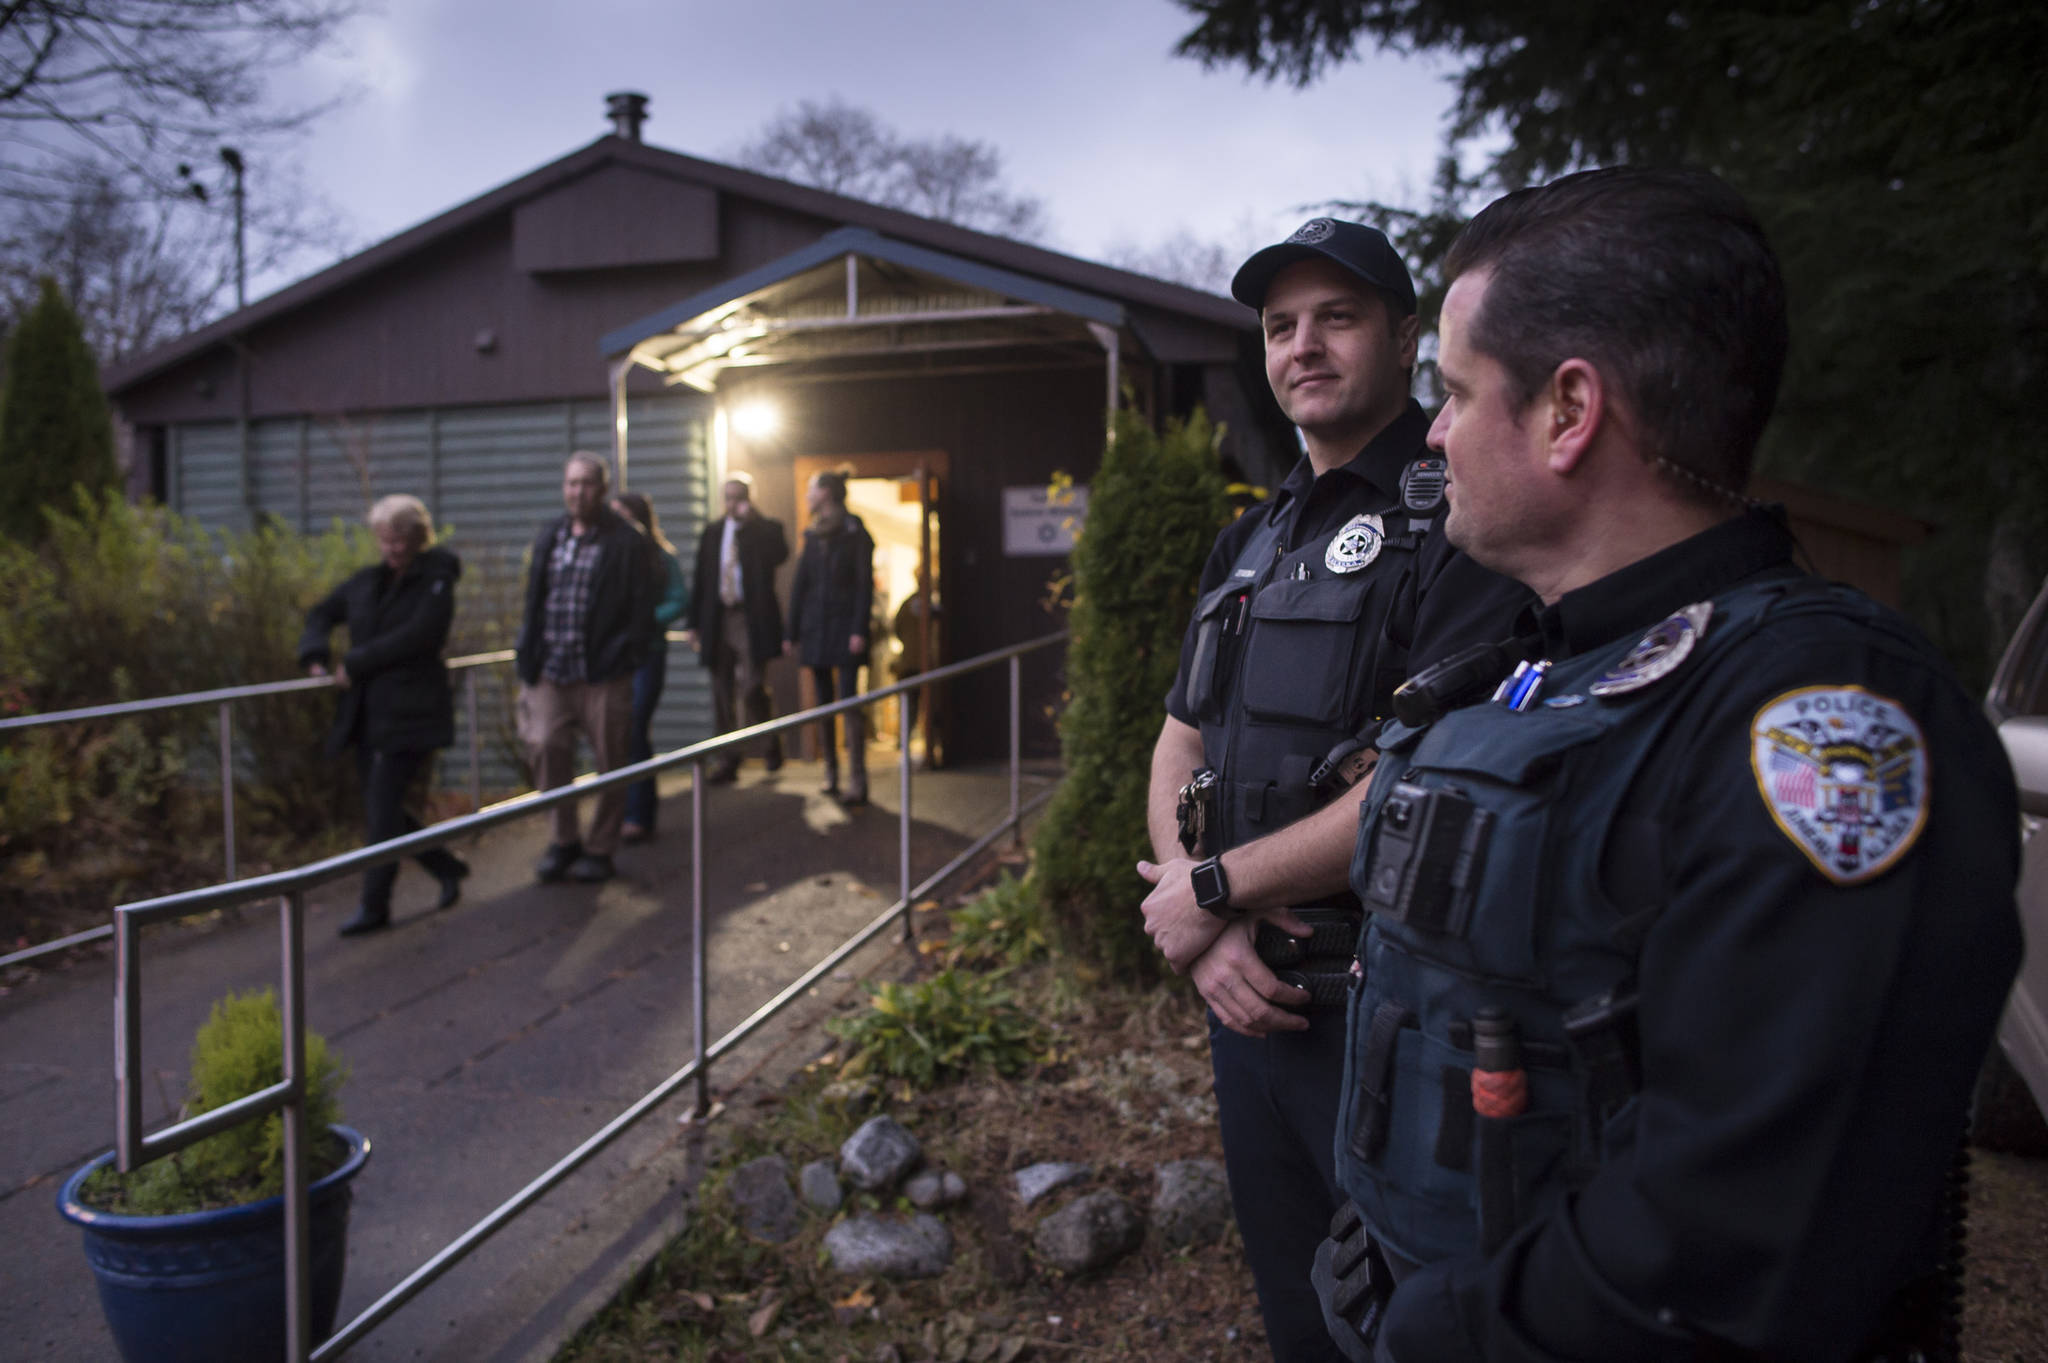 Juneau Police Officers Brent Bartlett, right, and John Cryderman provide a security presence at Temple Sukkat Shalom on Tuesday, Oct. 30, 2018, where Juneau residents gathered to honor the memory of the people killed by a gunman at the Tree of Life synagogue in Pittsburgh, Pennsylvania, on Saturday. (Michael Penn | Juneau Empire)